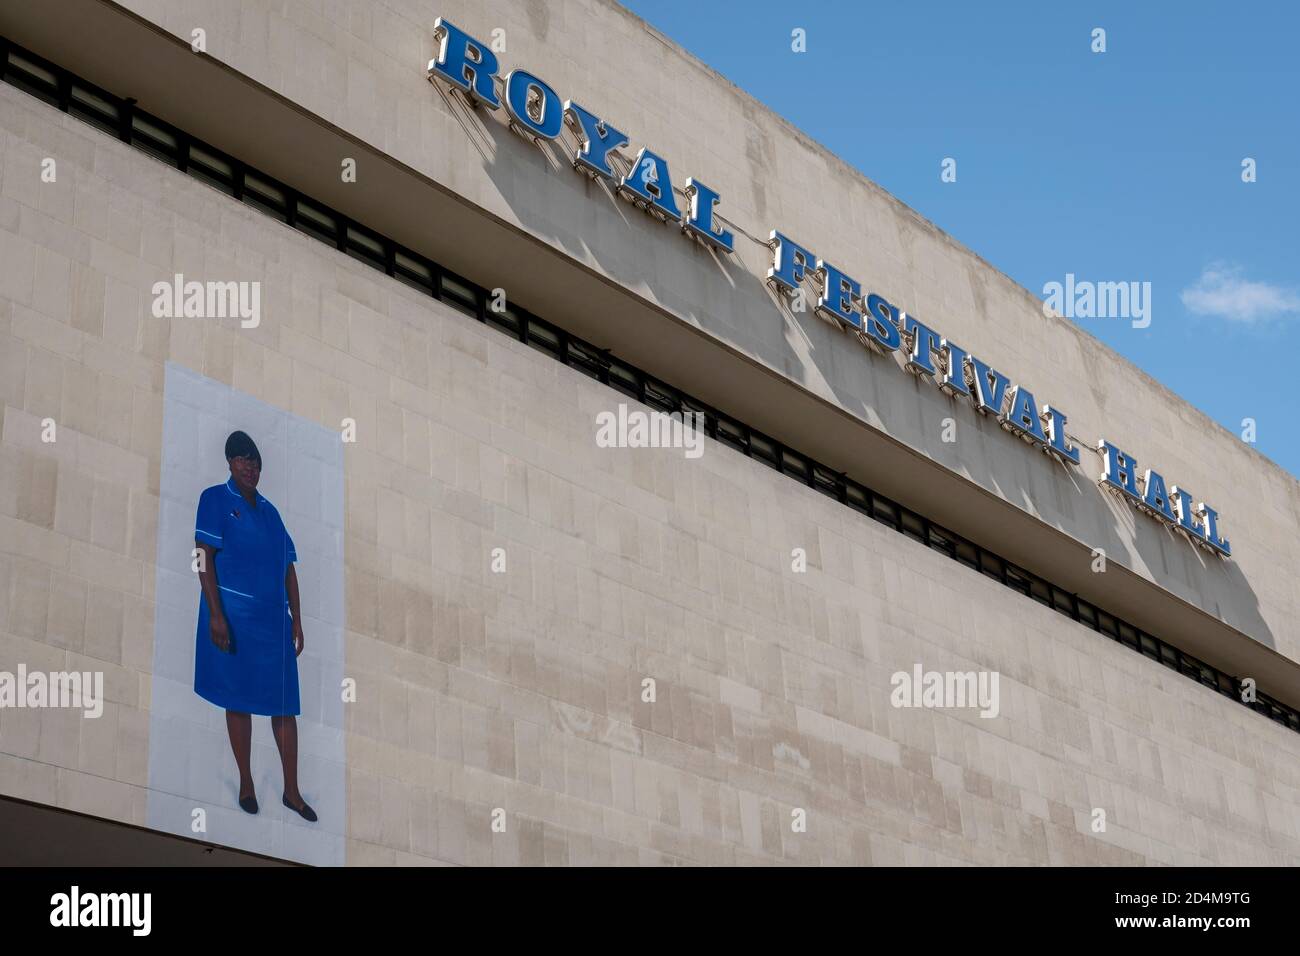 The Royal Festival Hall on the 17th September 2020 on the South Bank in South London in the United Kingdom. Photo by Sam Mellish Stock Photo